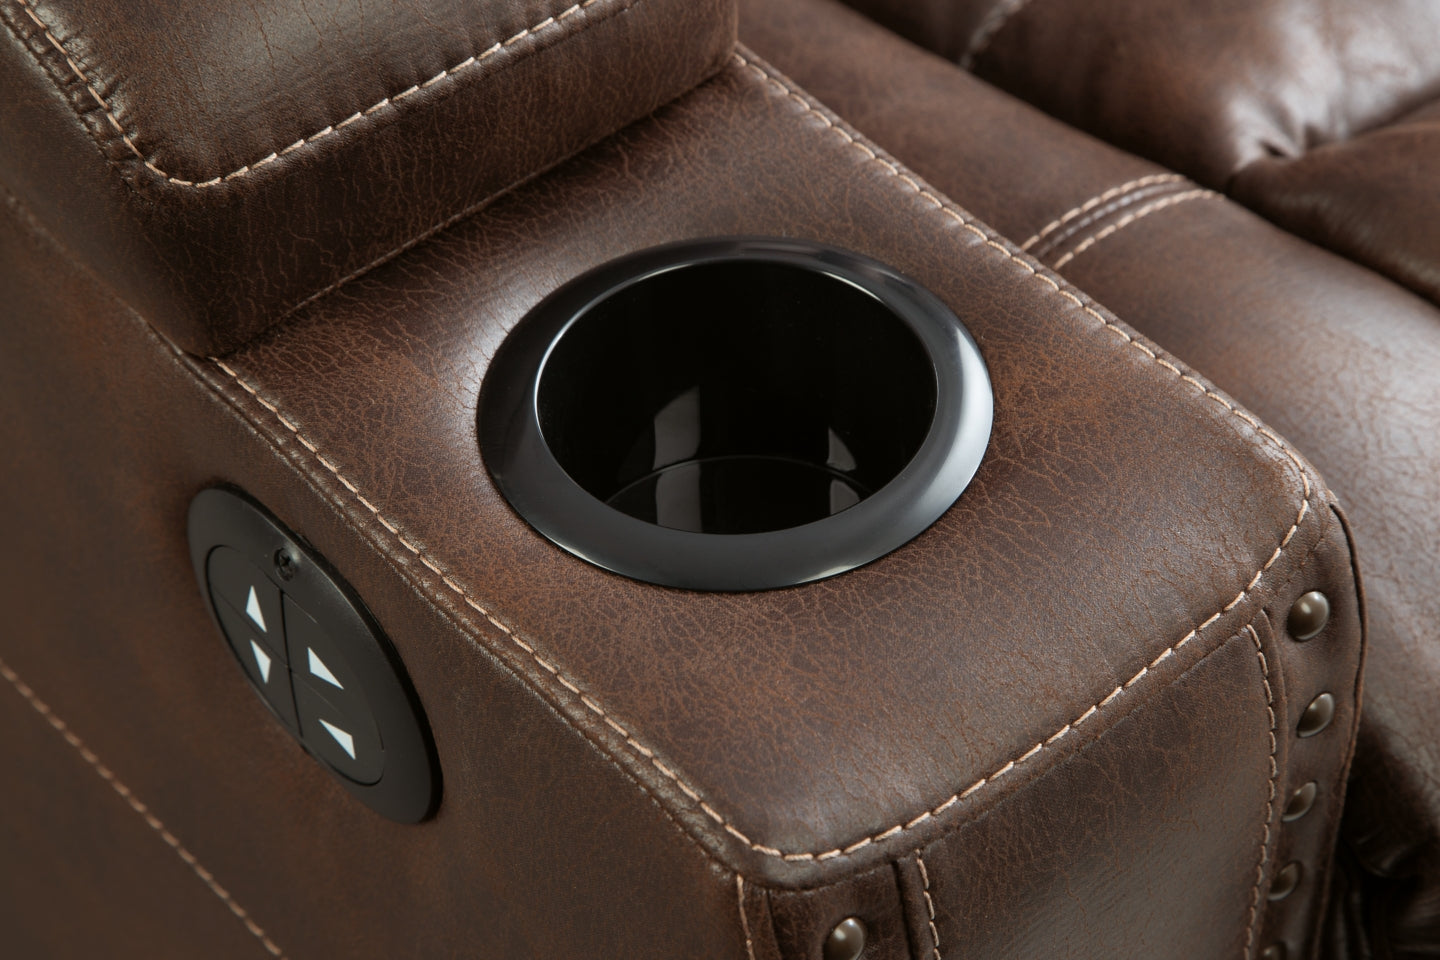 Owner's Box Power Reclining Loveseat with Console